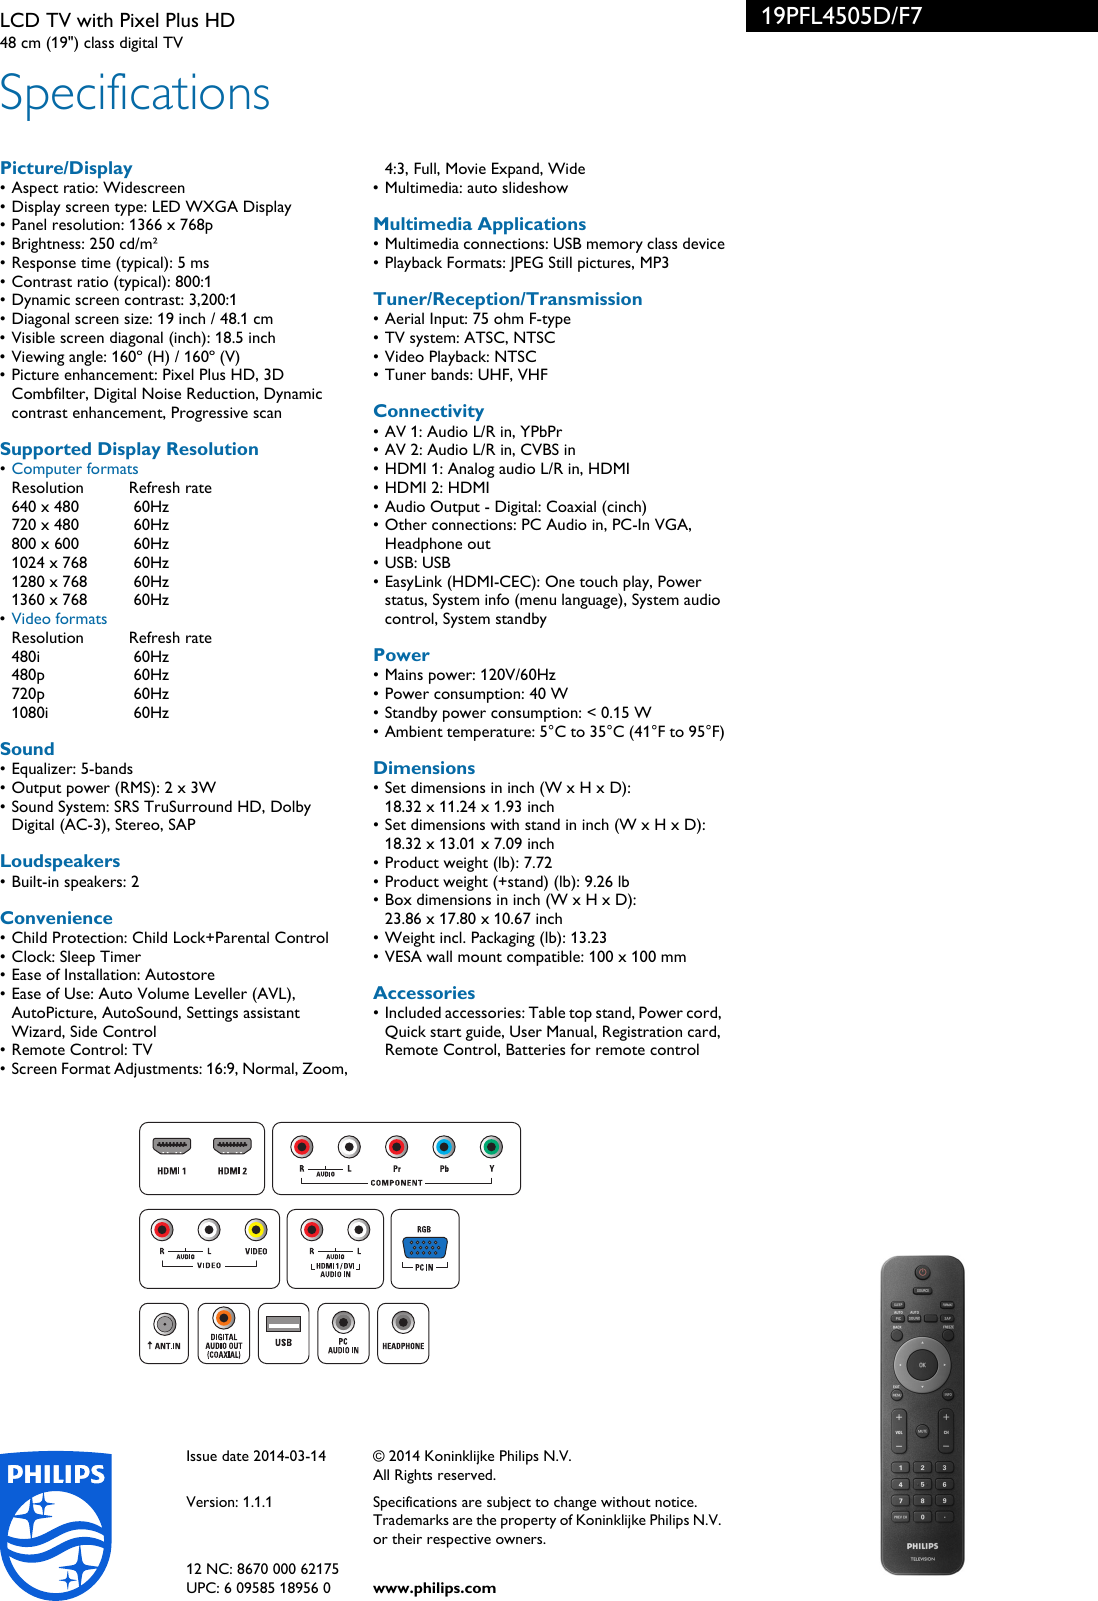 Page 3 of 3 - Philips 19PFL4505D/F7 LCD TV With Pixel Plus HD User Manual Leaflet 19pfl4505d F7 Pss Aenus